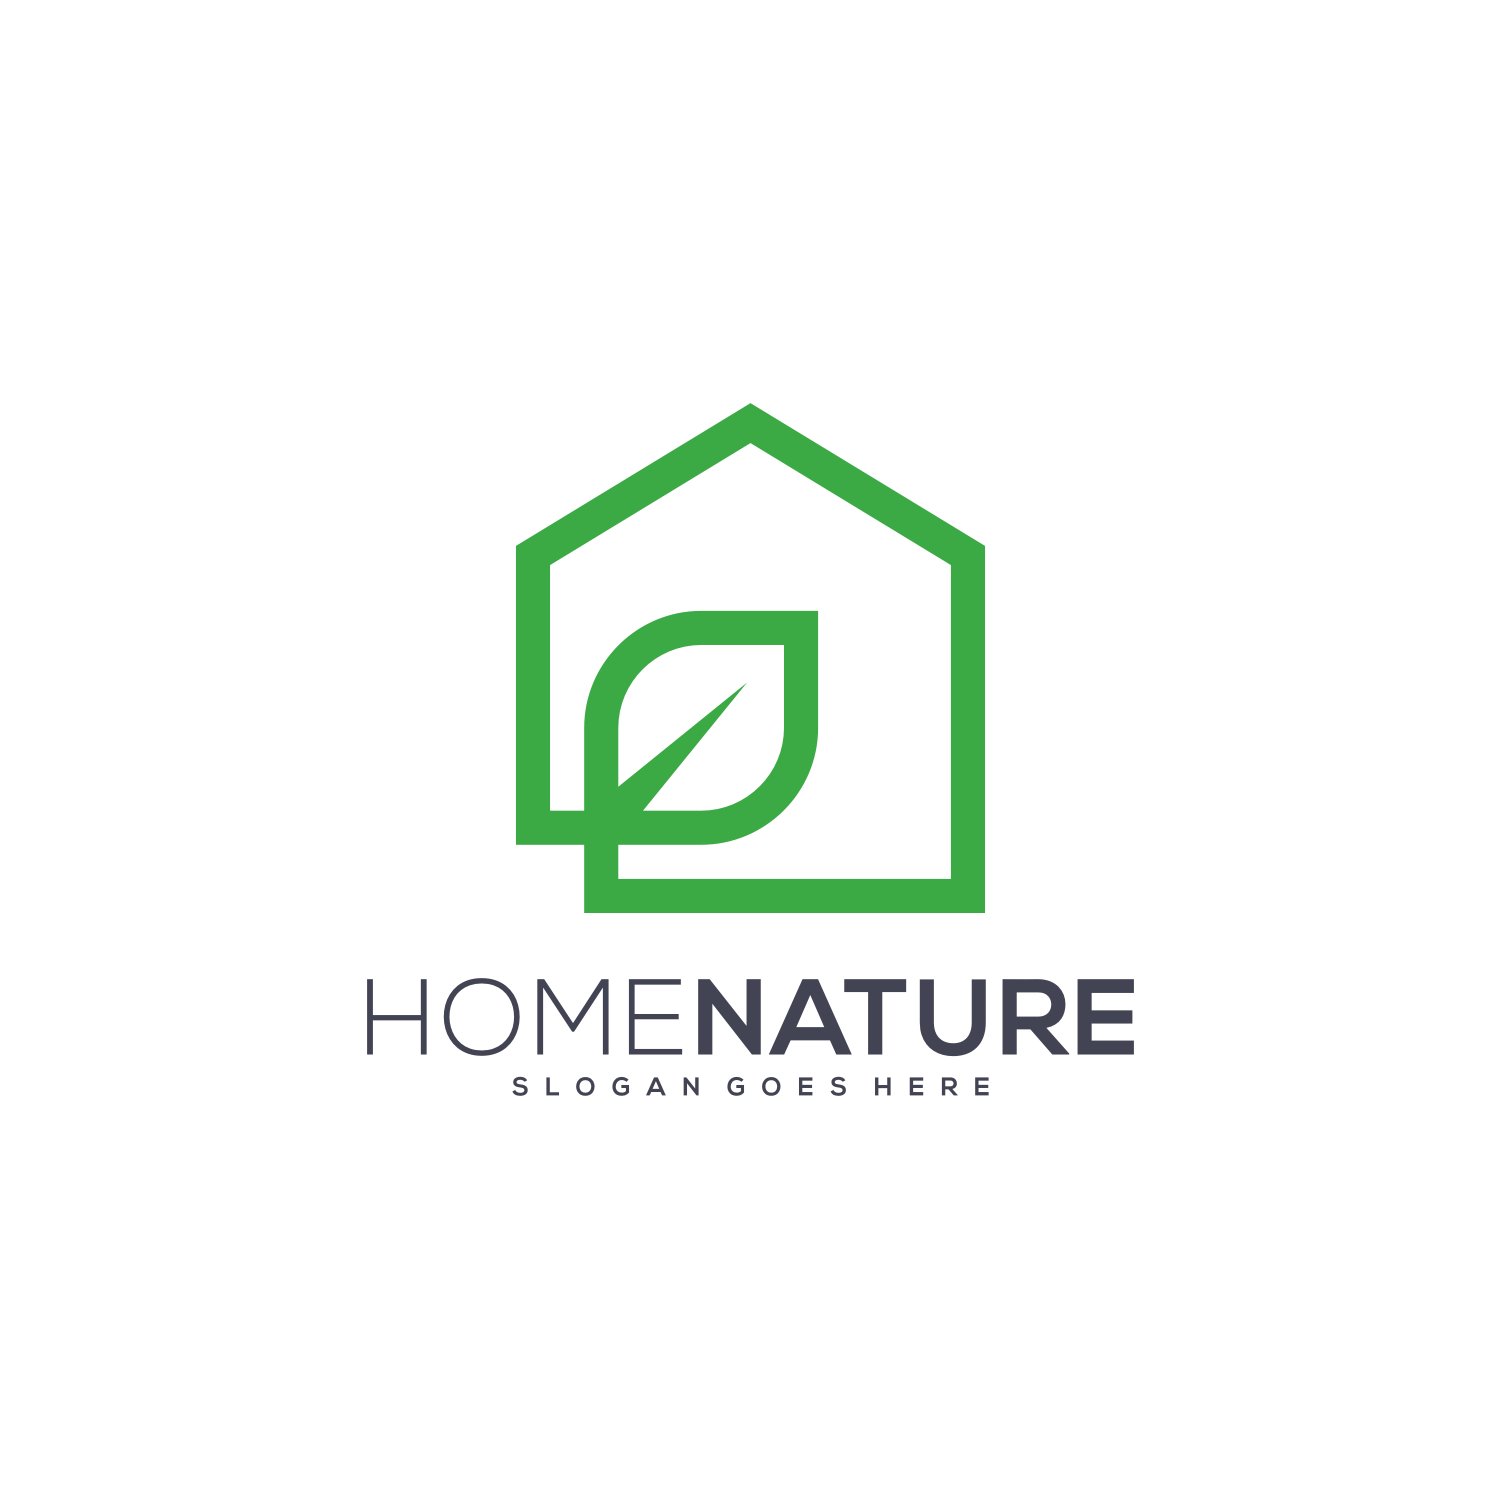 Home Nature Logo Beautiful Vector Design Cover Image.